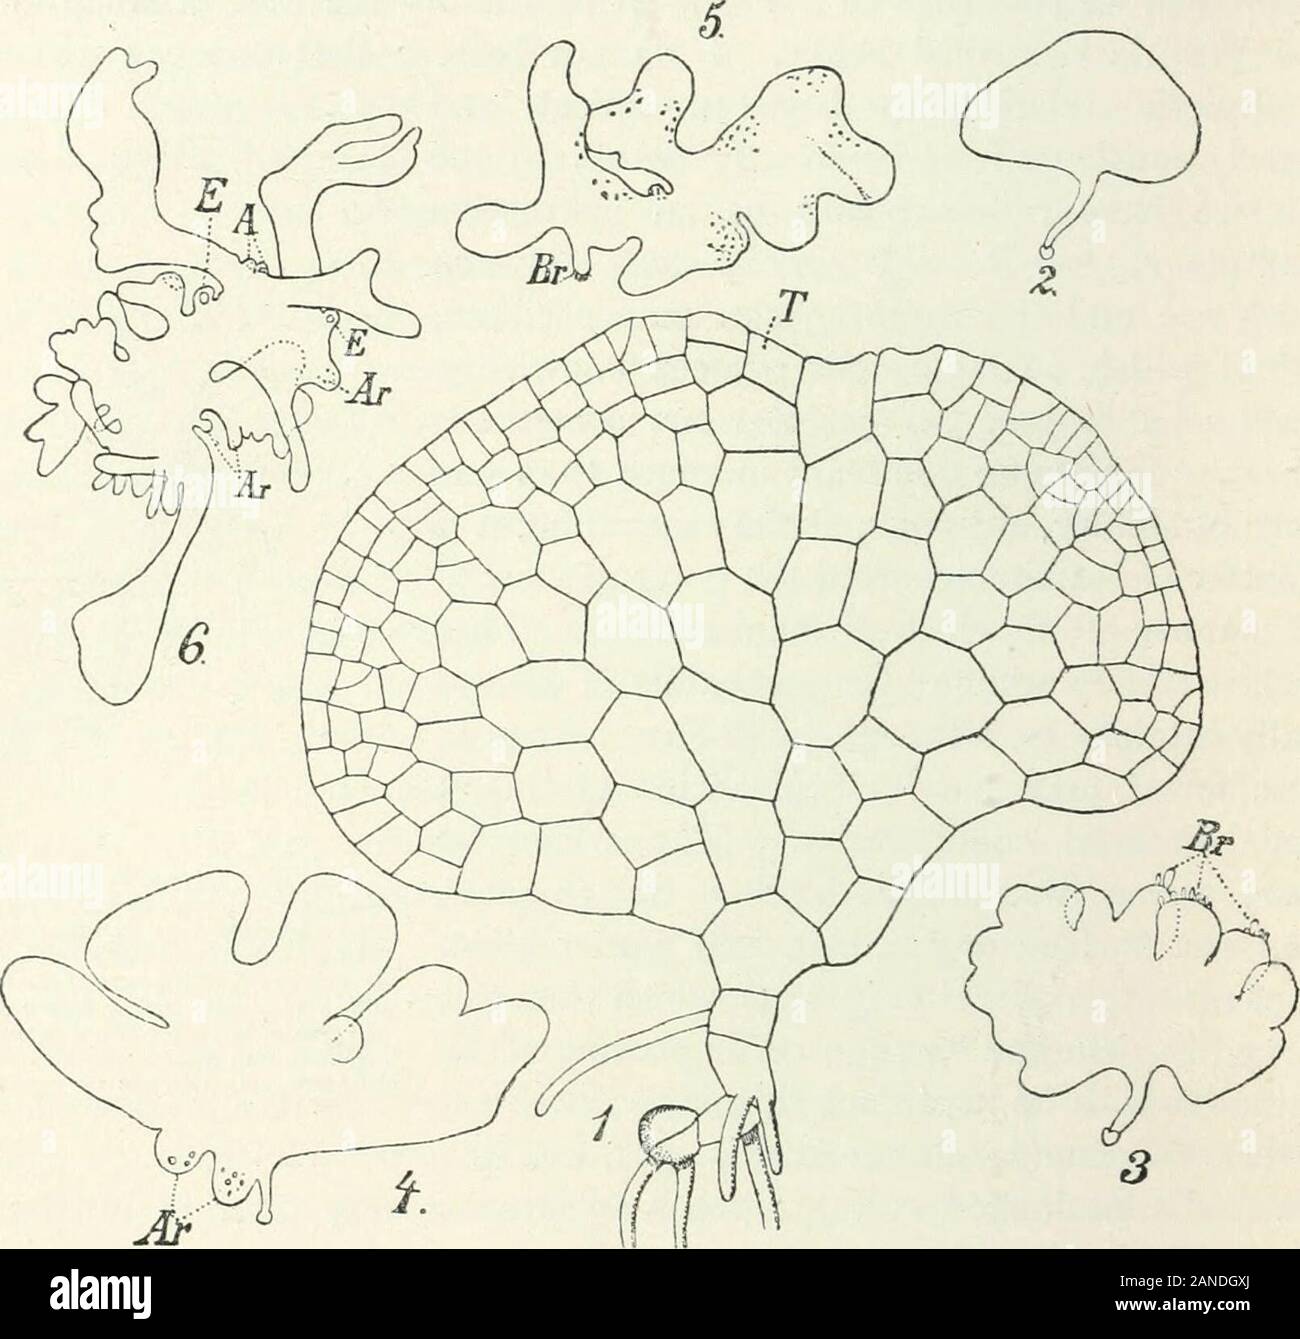 Organography of plants, especially of the archegoniatae and spermaphyta . eing better fed, where broad wings have developed,beneath which drops of water (in-dicated by dots) collect. very poor in nutriment. Prothalli of Polypodiaceae wanting the Heart-like Outline. Anogramme. The prothallus of the genus Anogramme connects withthe forms in which the formation of the two wings takes place at different How they arise we shall not stop to inquire. 2o6 CONFIGURATION OF THE PROTHALLUS OF PTERIDOPHYTA times. On account of its noteworthy adaptations it will be mentionedparticularly below ^. It produce Stock Photo